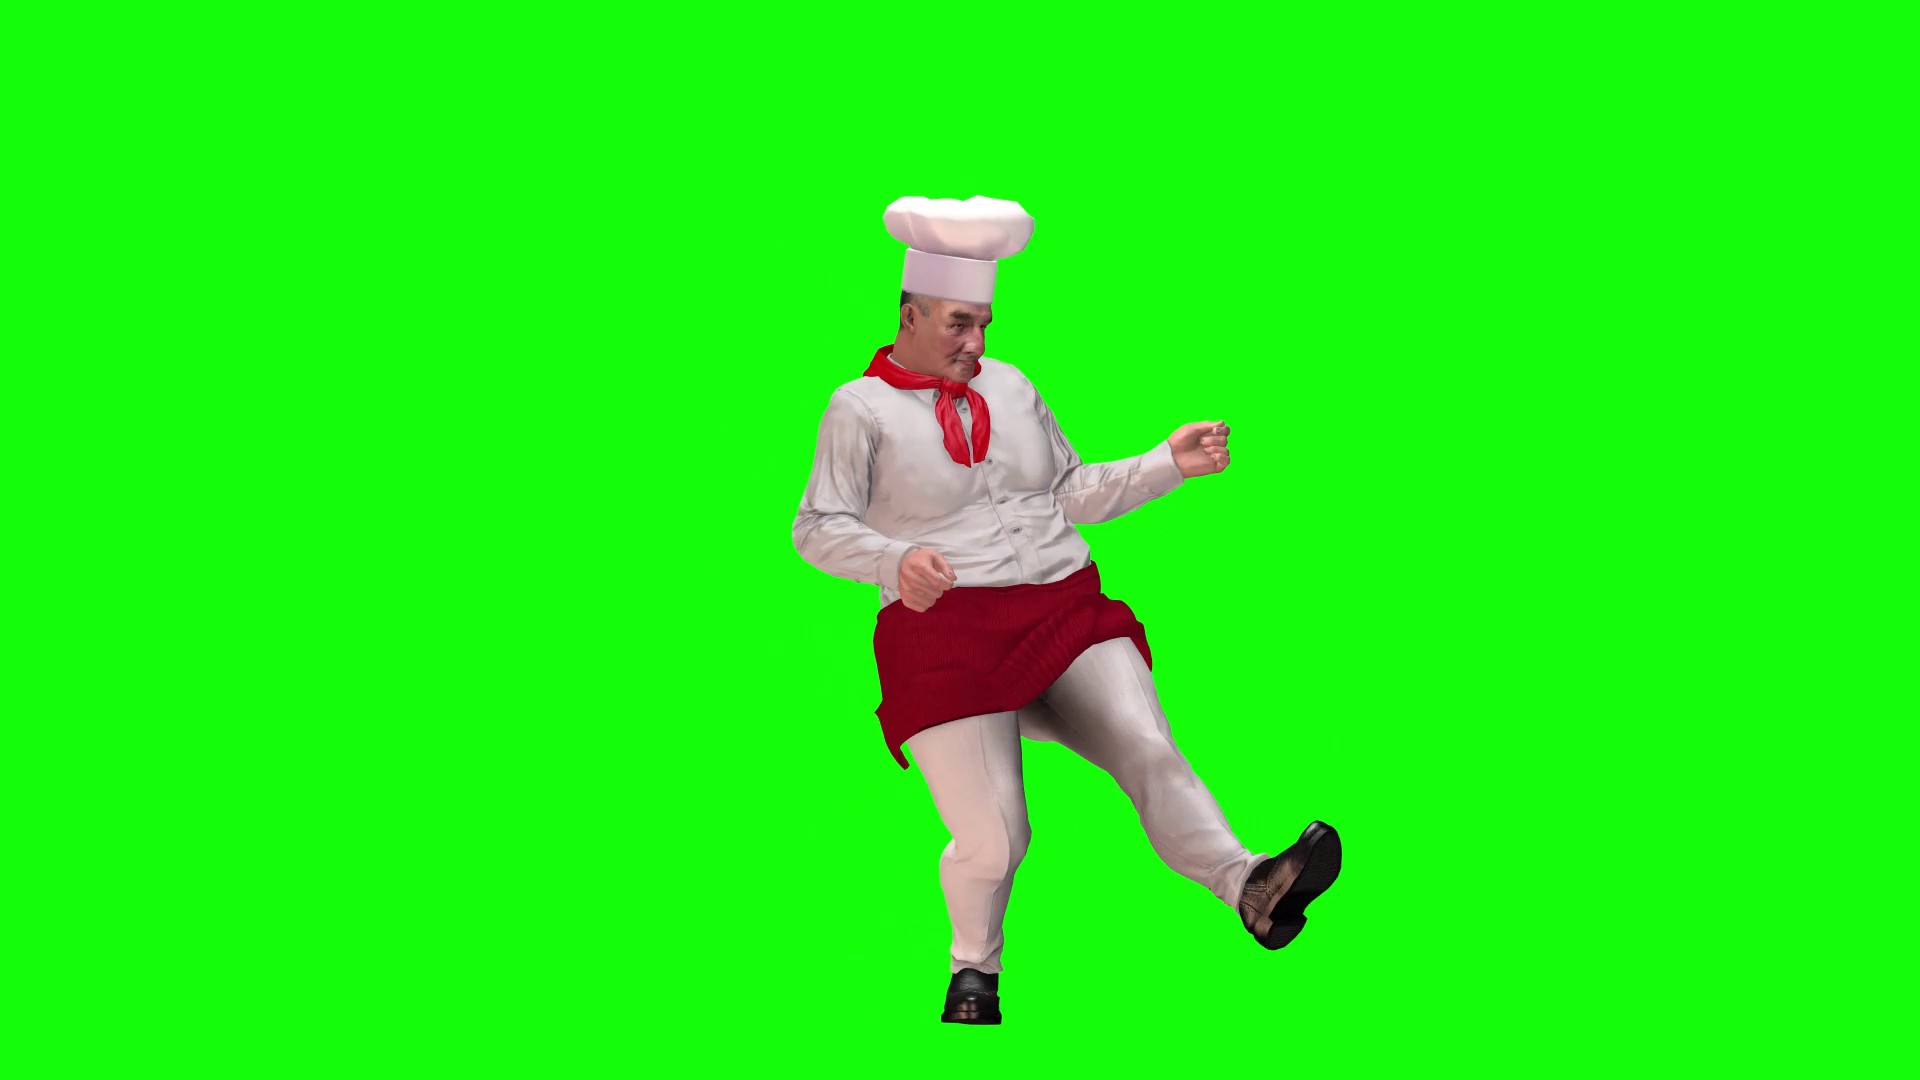 Fat Chef Uncle Dancing Fun in Green Chromakey